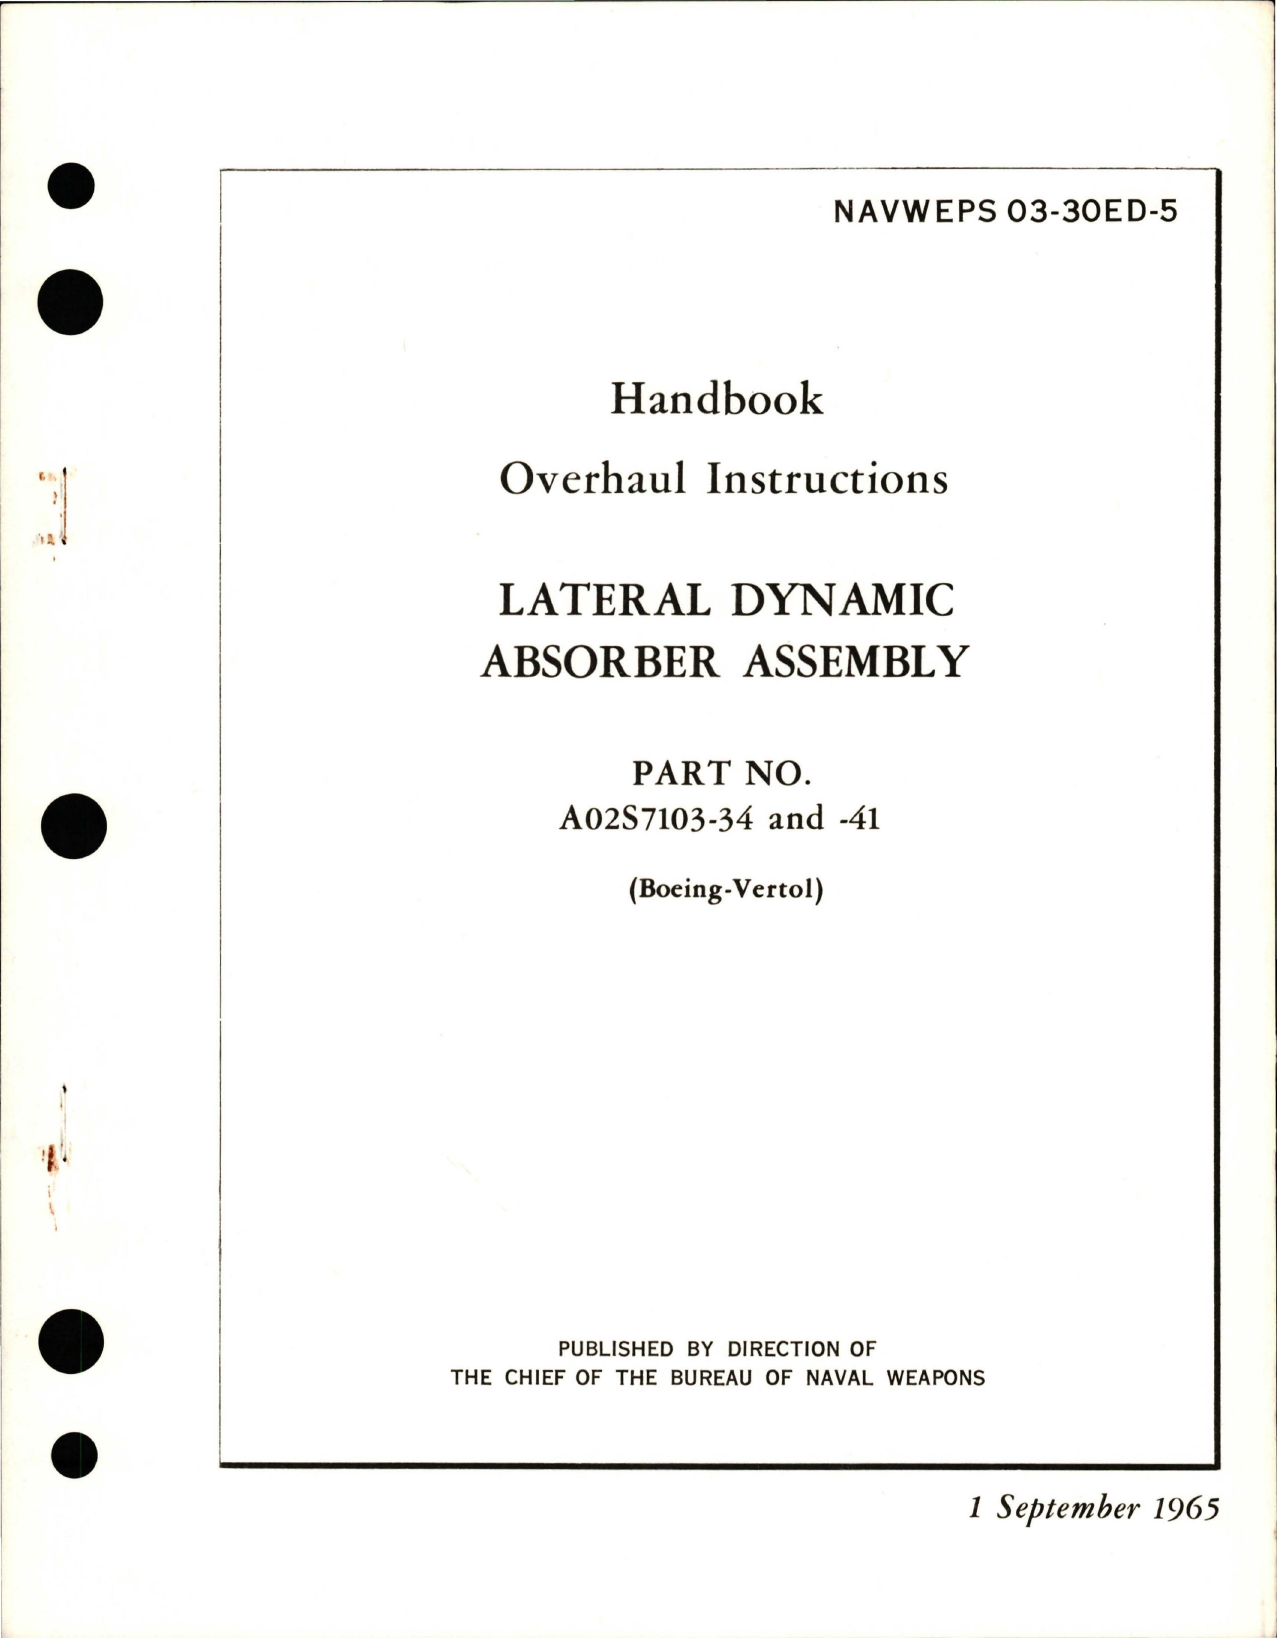 Sample page 1 from AirCorps Library document: Overhaul Instructions for Lateral Dynamic Absorber Assembly - Part A02S7103-34 and A02S7103-41